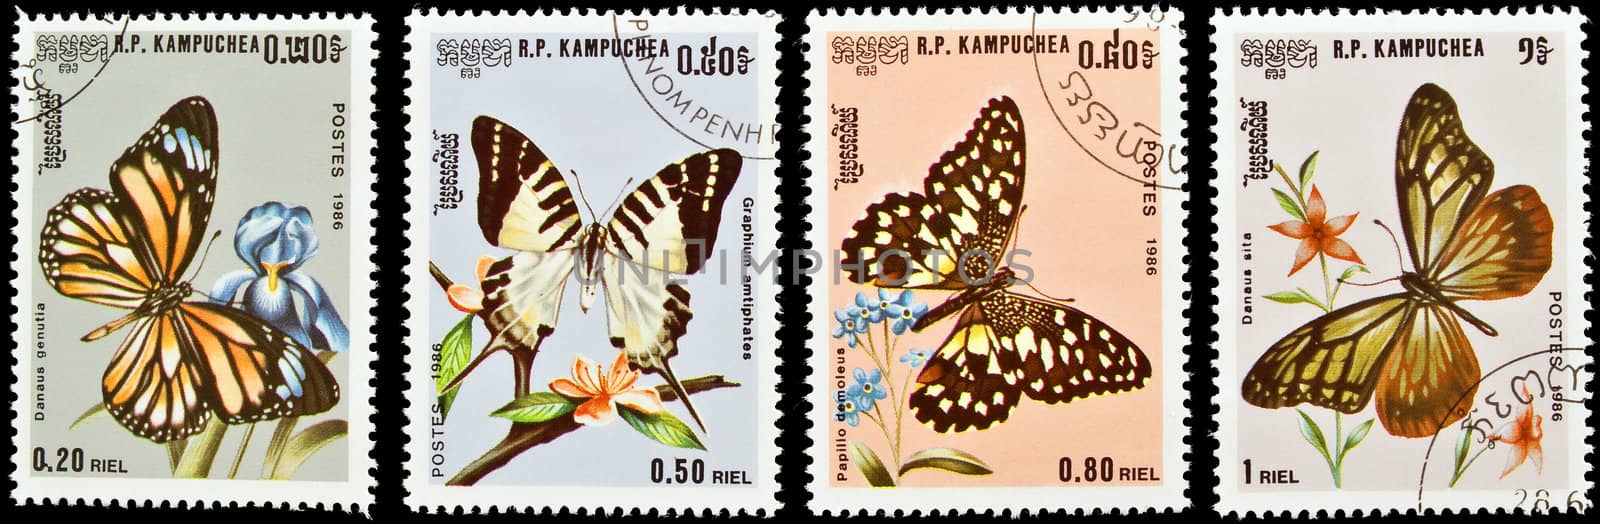 Kampuchea - circa 1986:postage stamps feature a variety of butterflies, circa 1986 in 
Democratic Kampuchea.